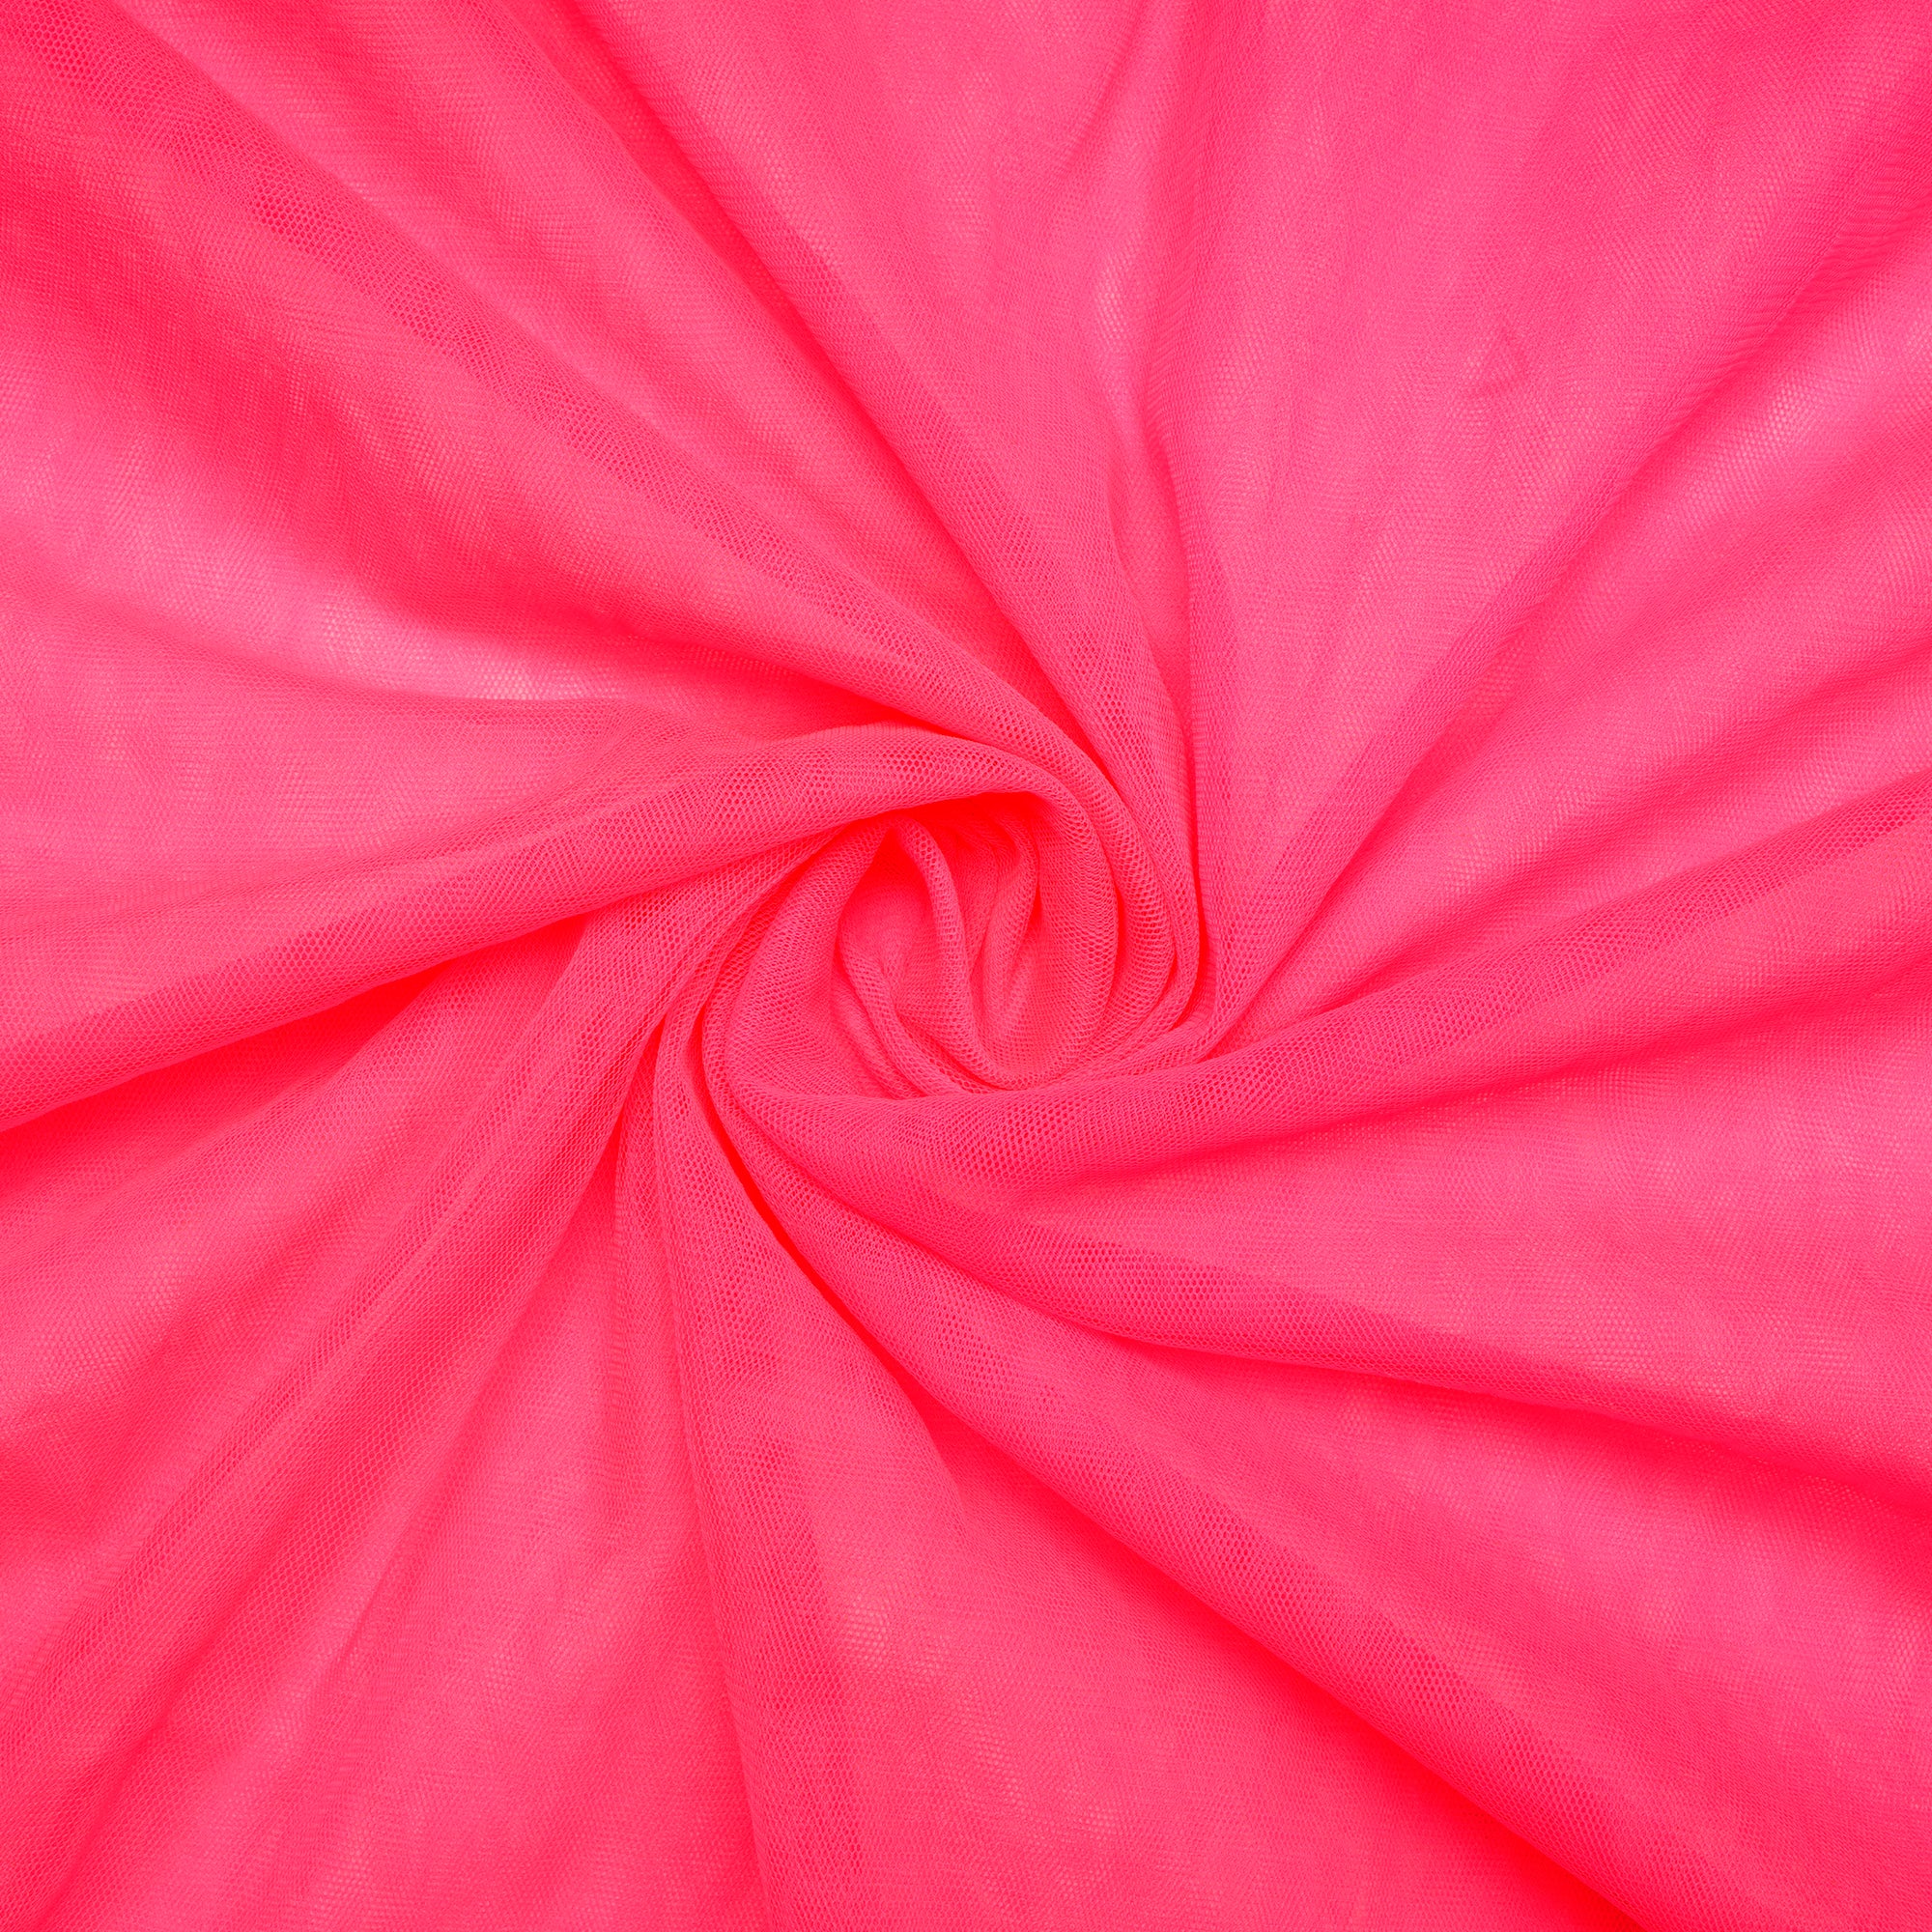 Fluorescent Pink Color Nylon Butterfly Net Fabric